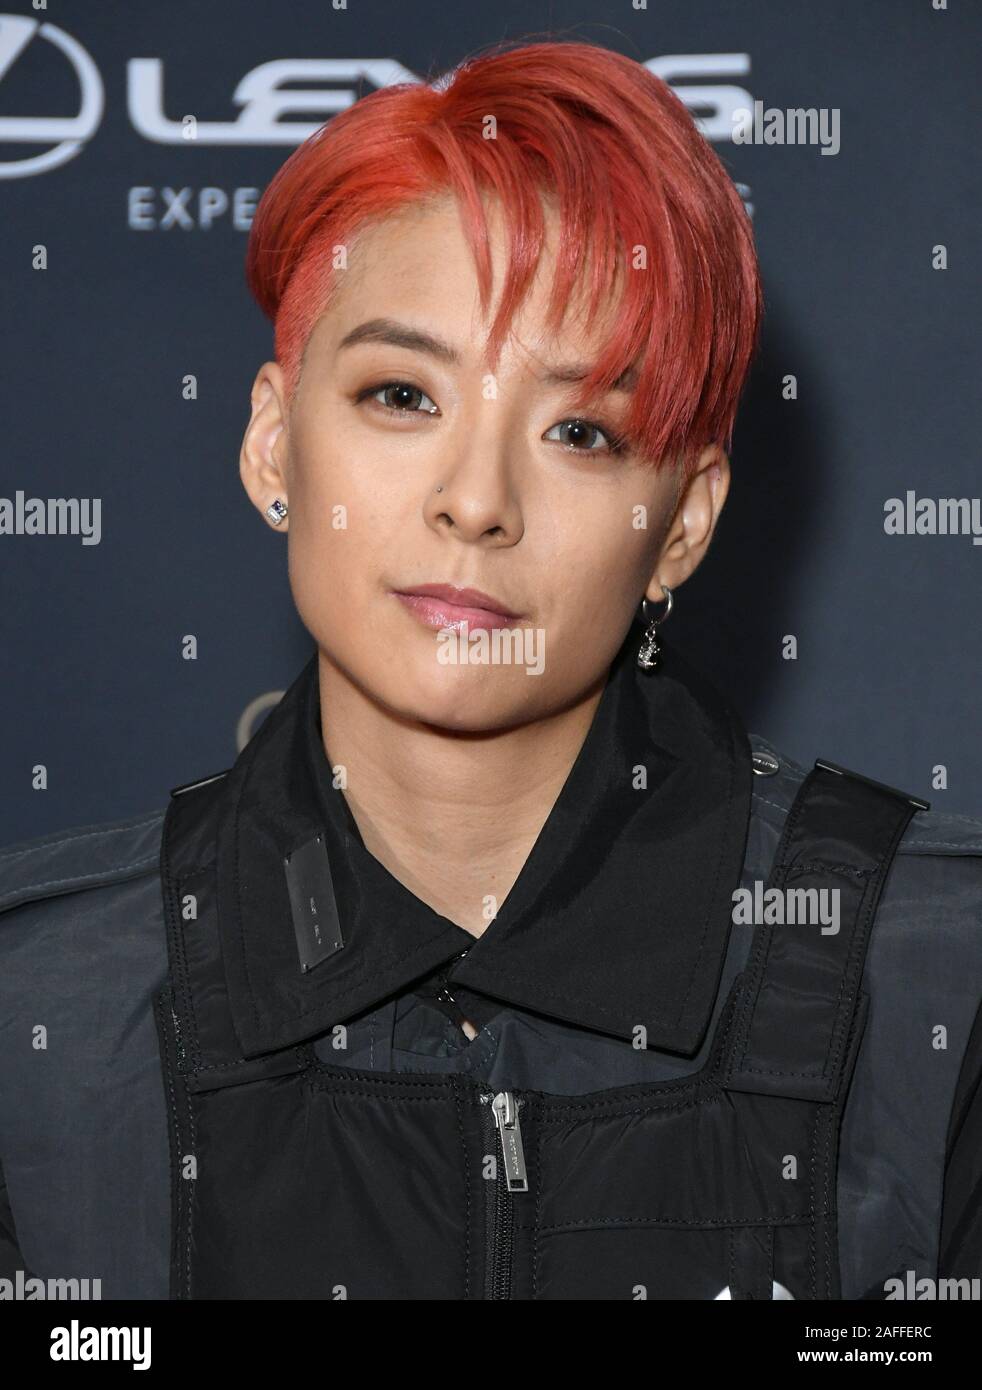 Is Amber Liu well accepted in South Korea She has this androgynous style  and is not skinny like other girl idols she even has done undercuts as  hairstyle So Im curious of